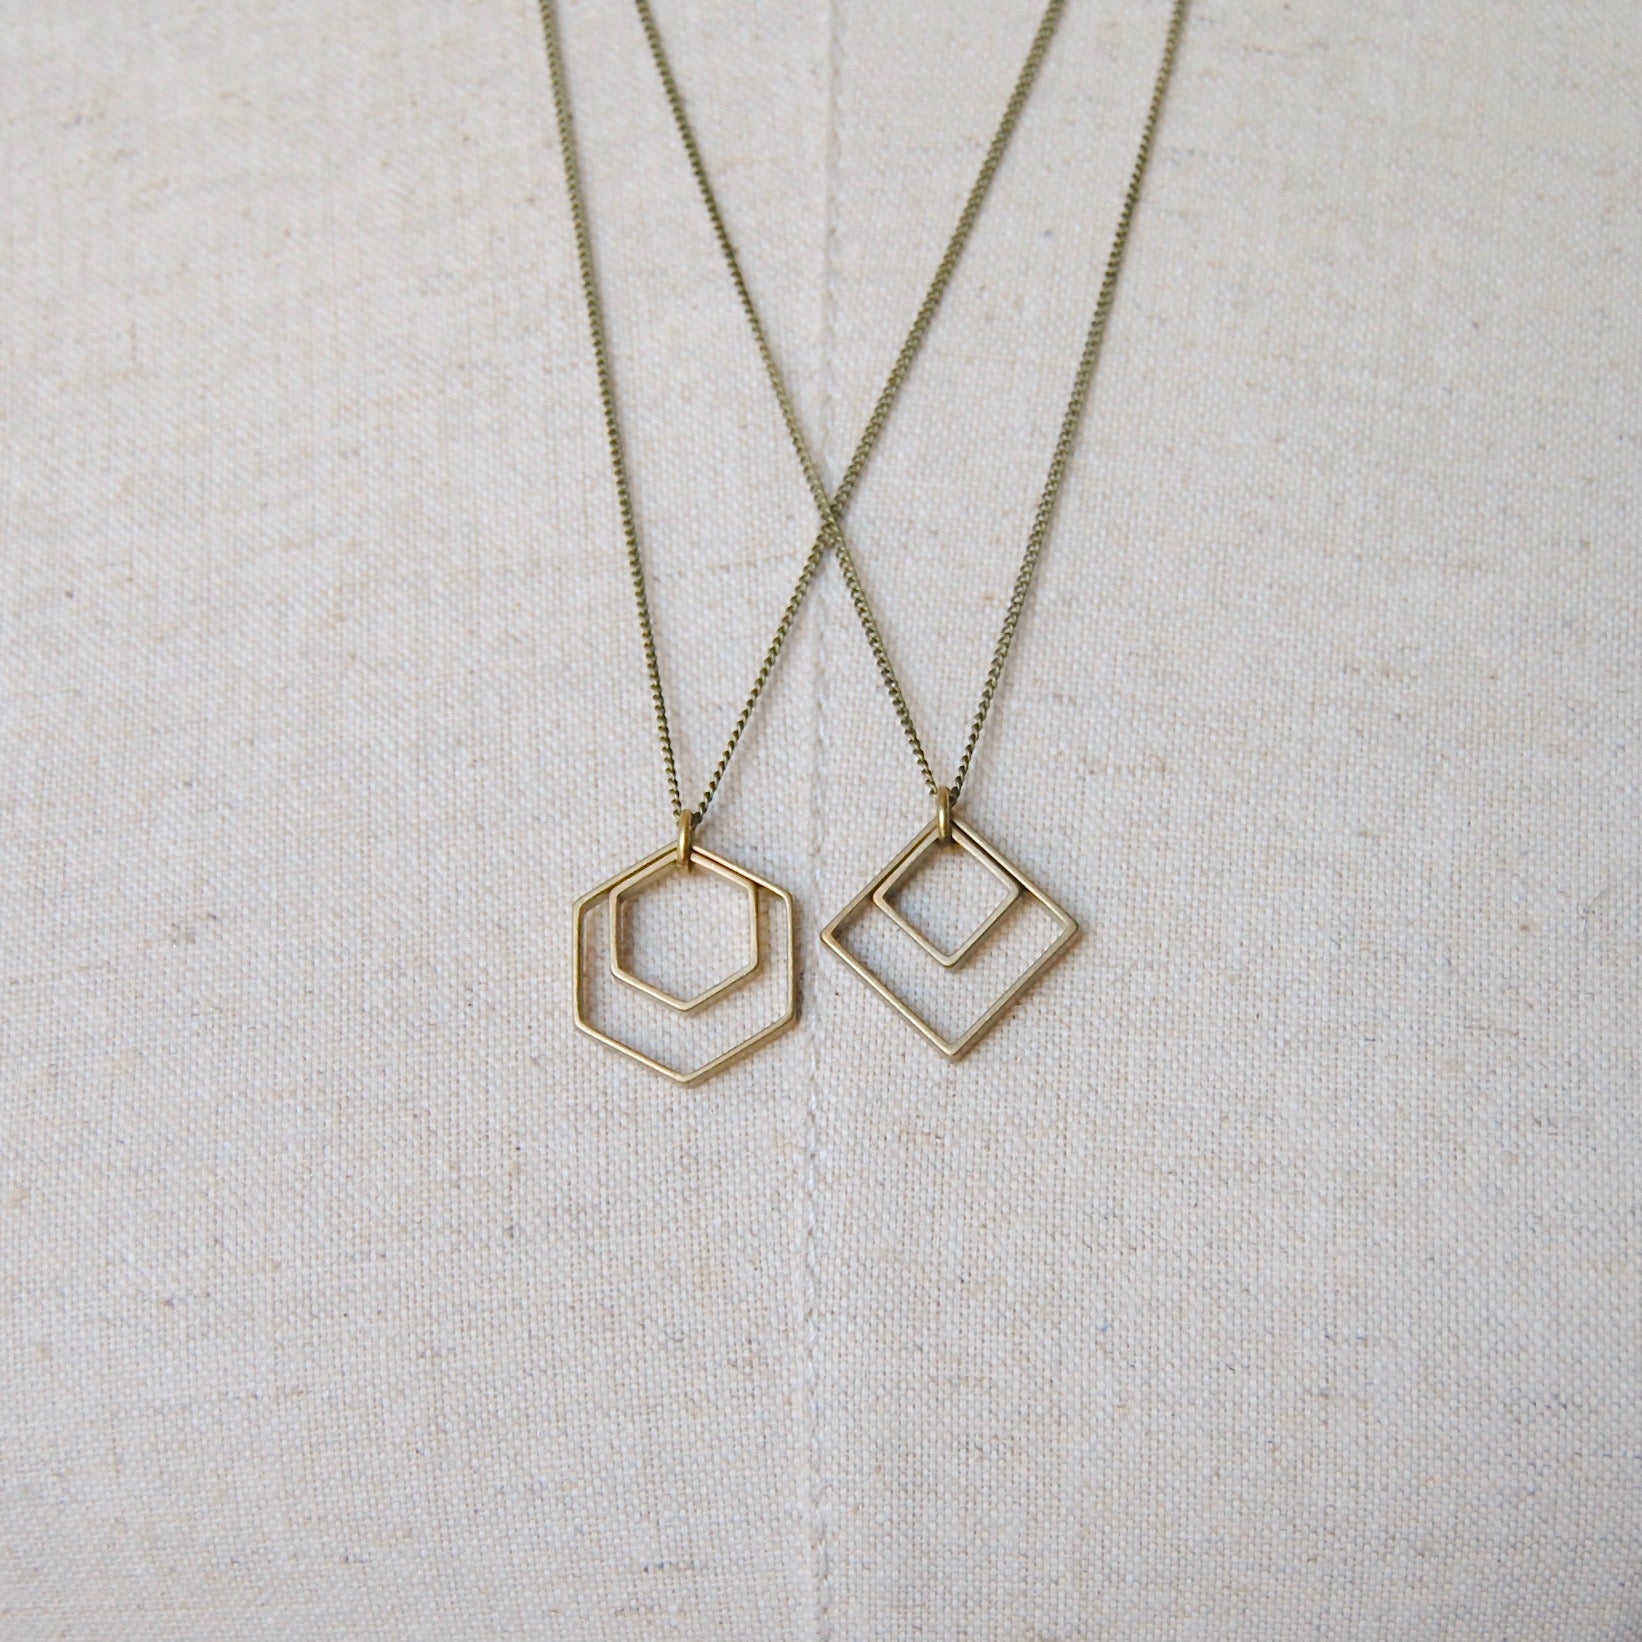 HEXAGONS STYLE ALSO AVAILABLE